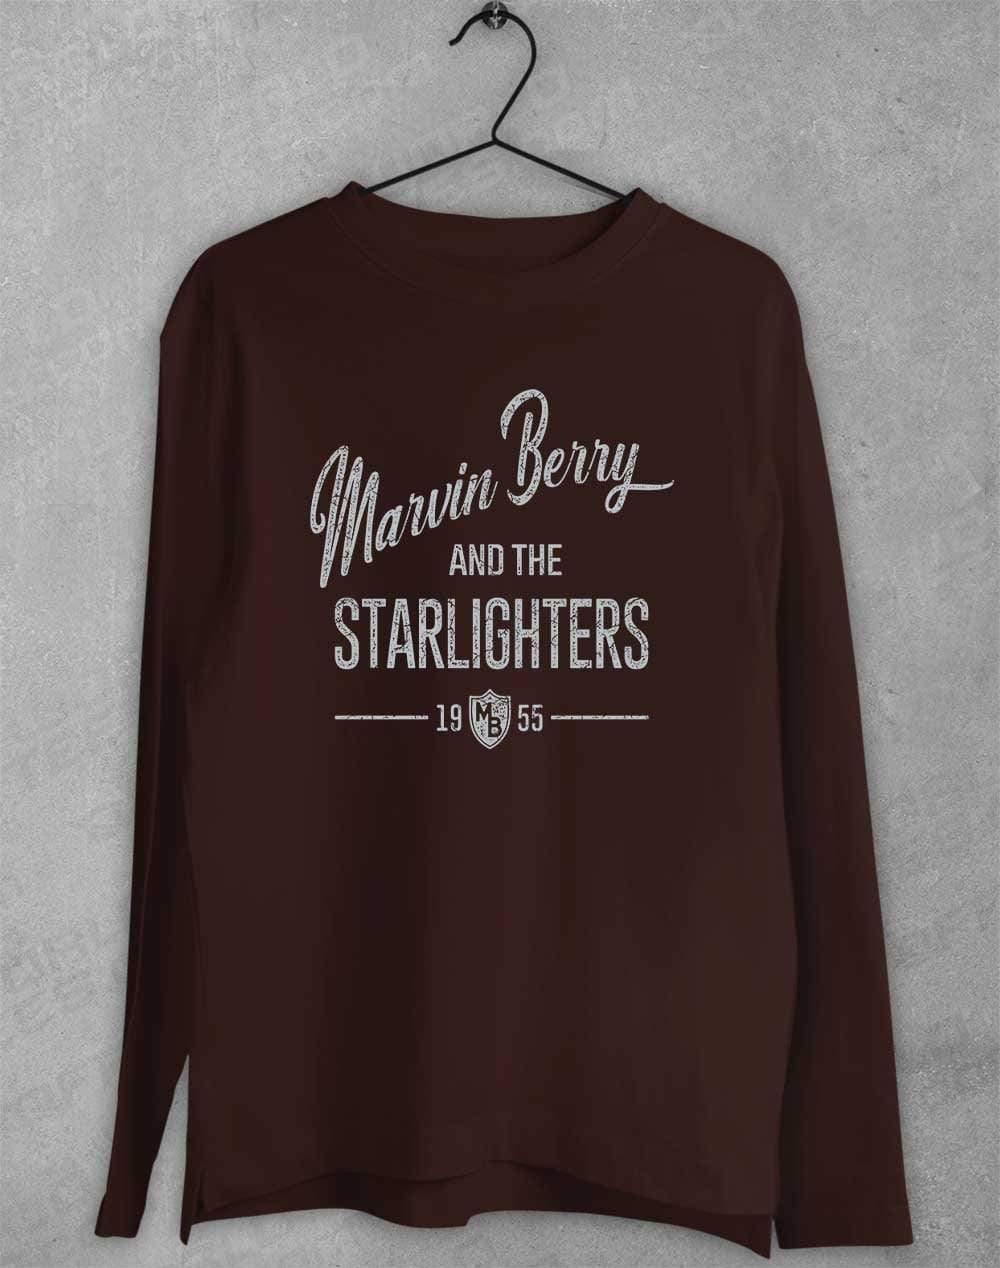 Marvin Berry and the Starlighters Long Sleeve T-Shirt S / Dark Chocolate  - Off World Tees